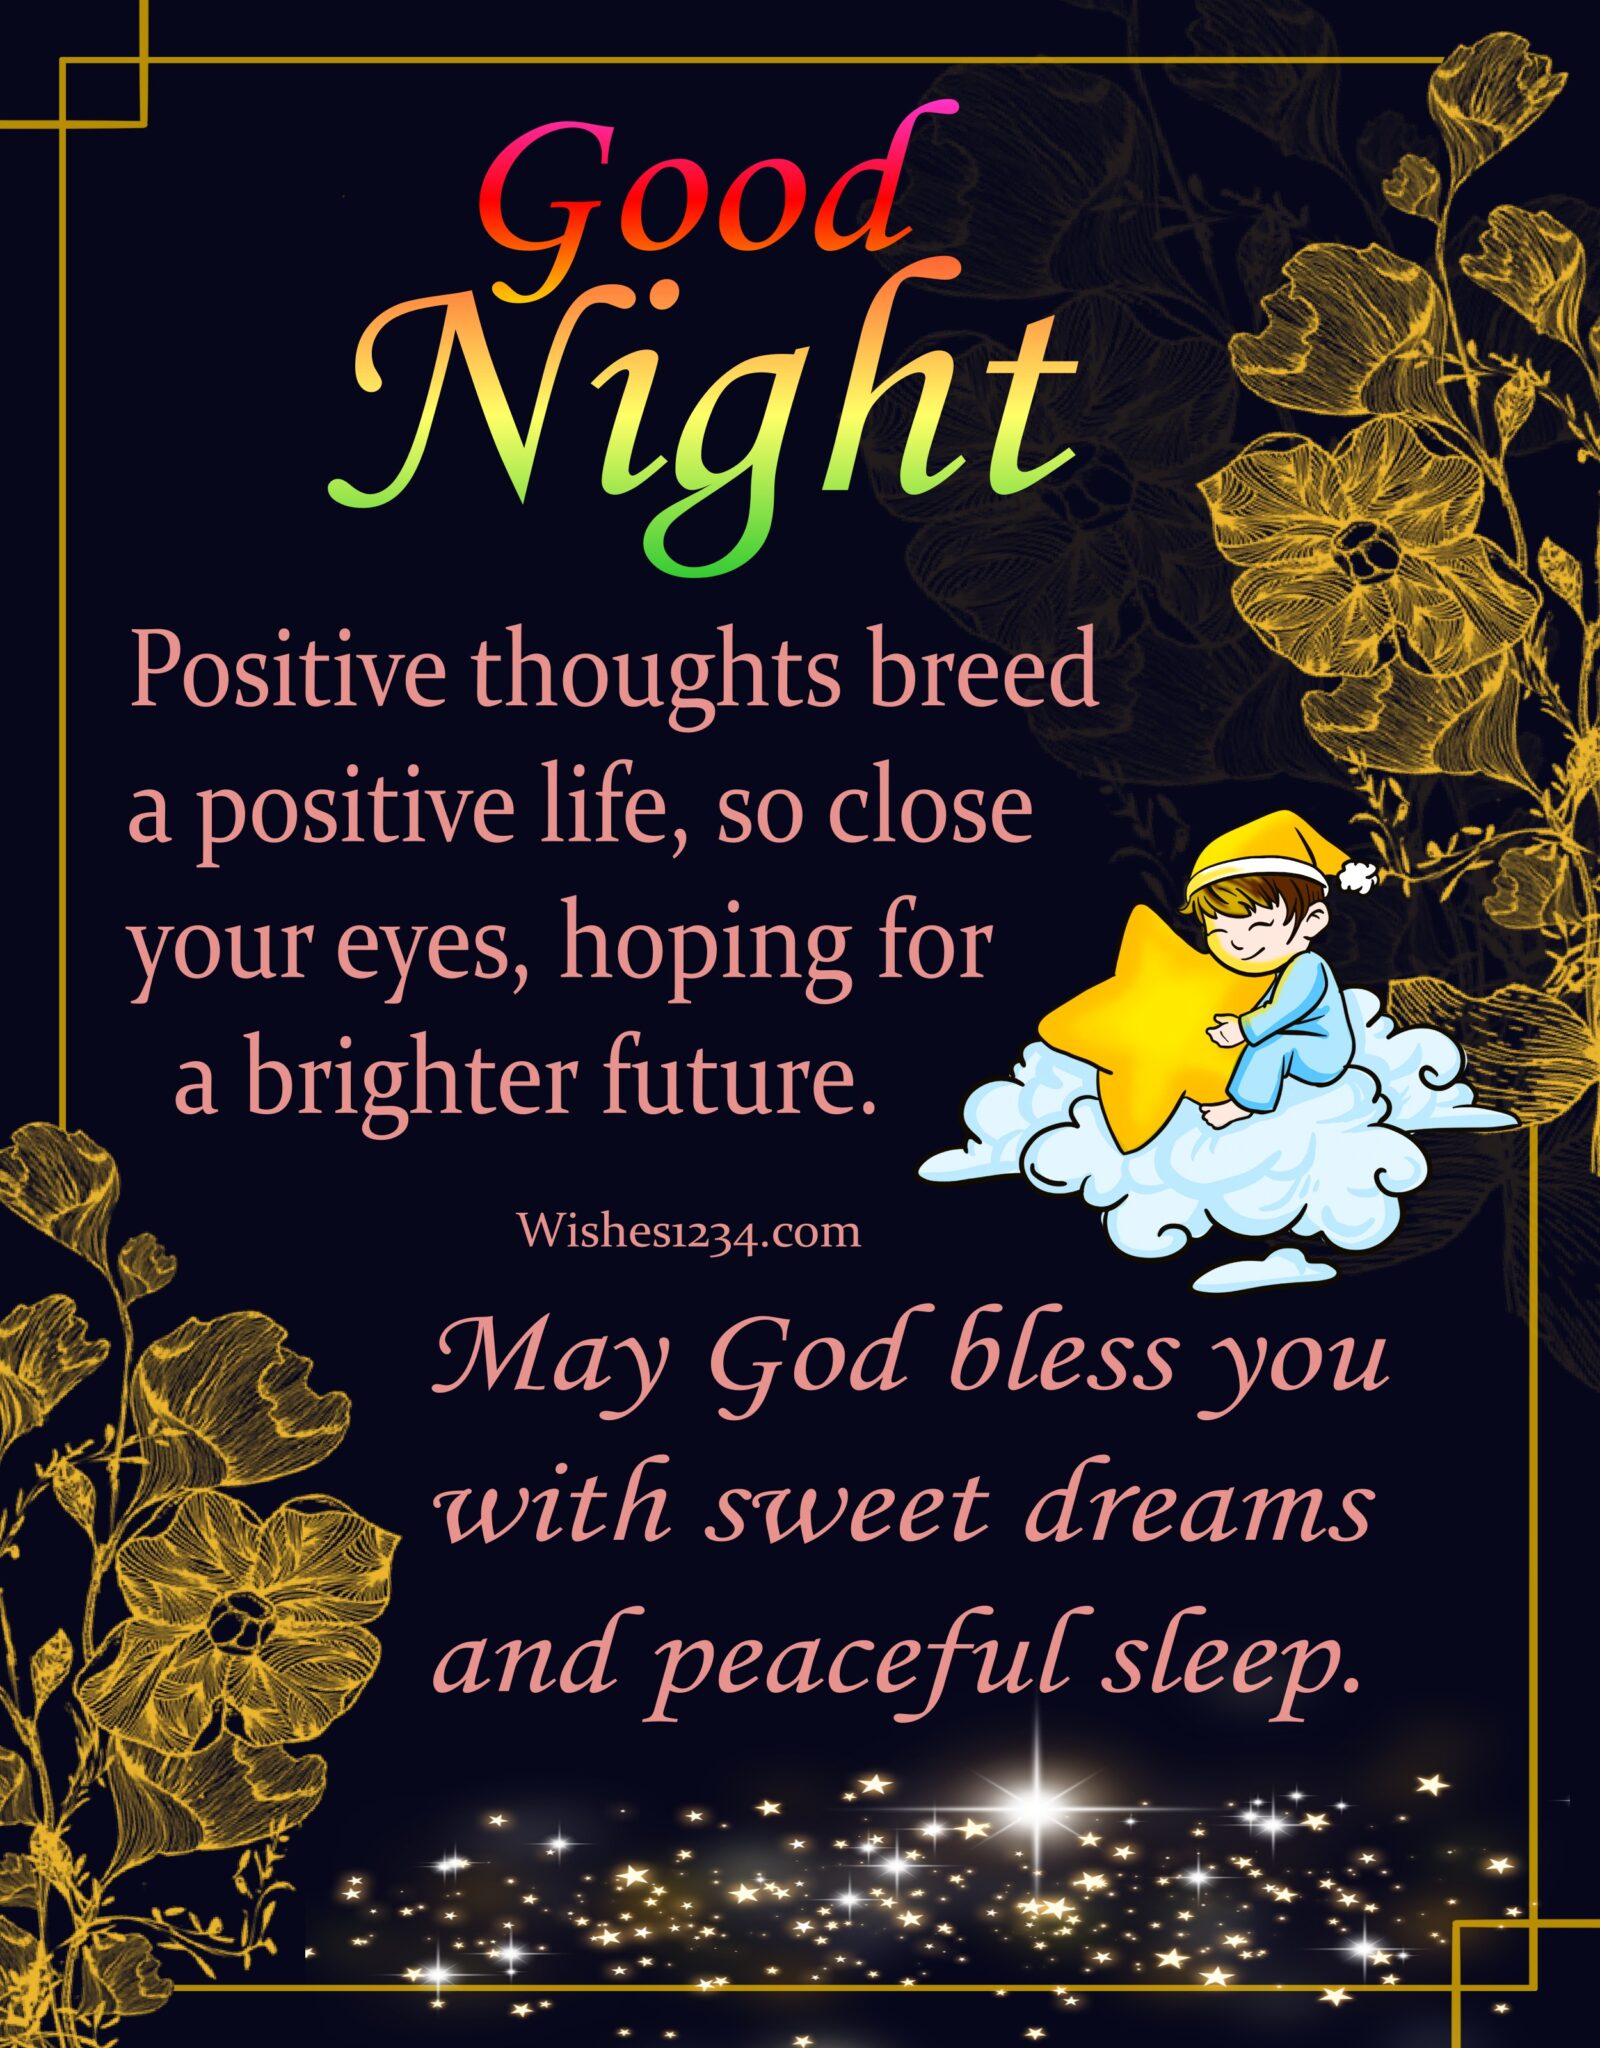 Good Night Images | Good Night Blessings - wishes1234